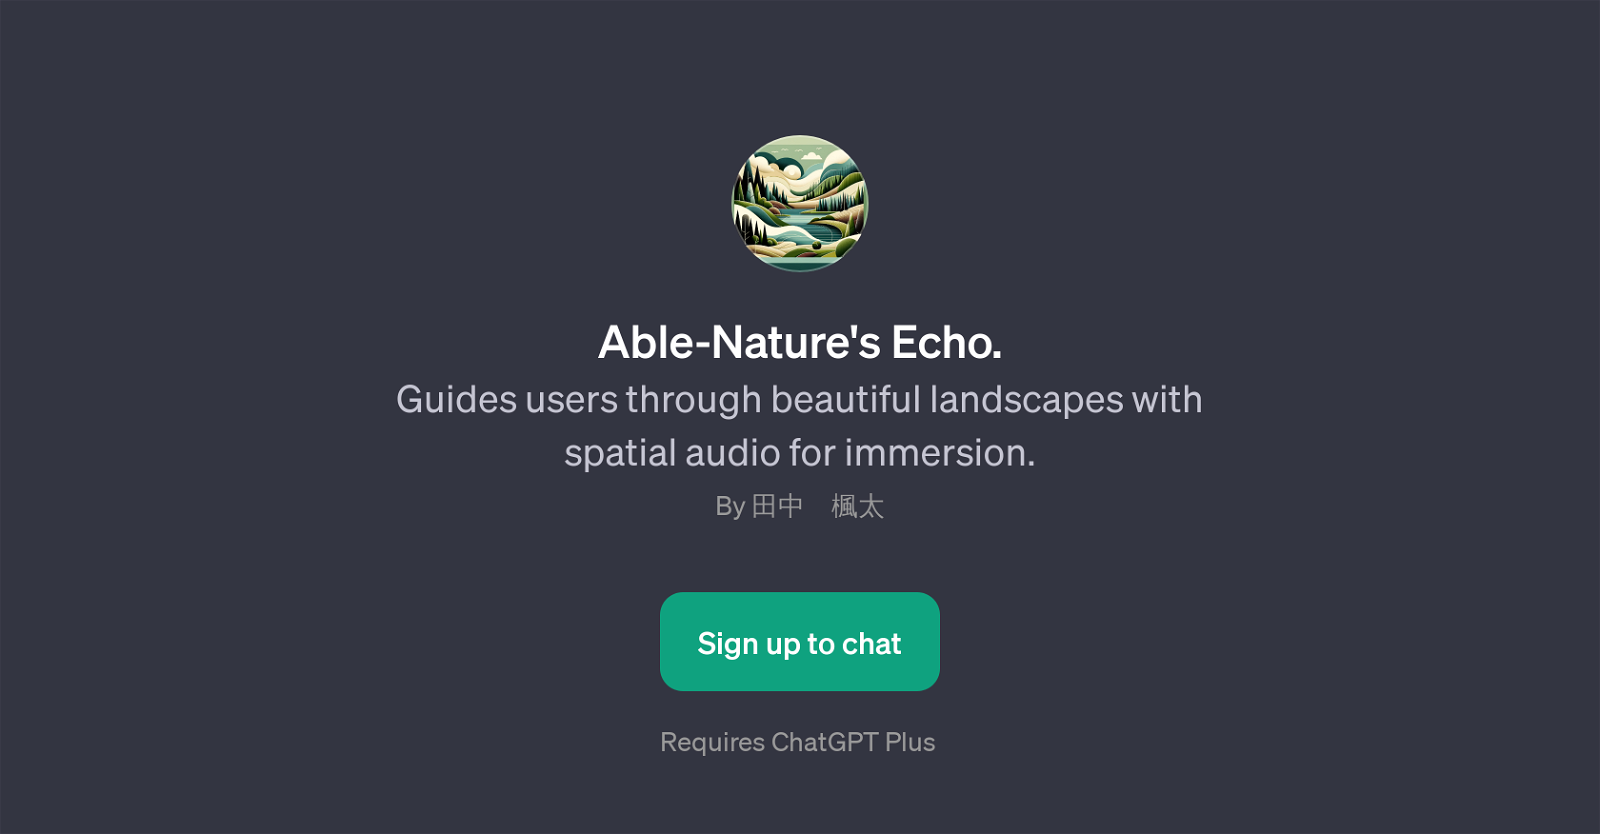 Able-Nature's Echo website